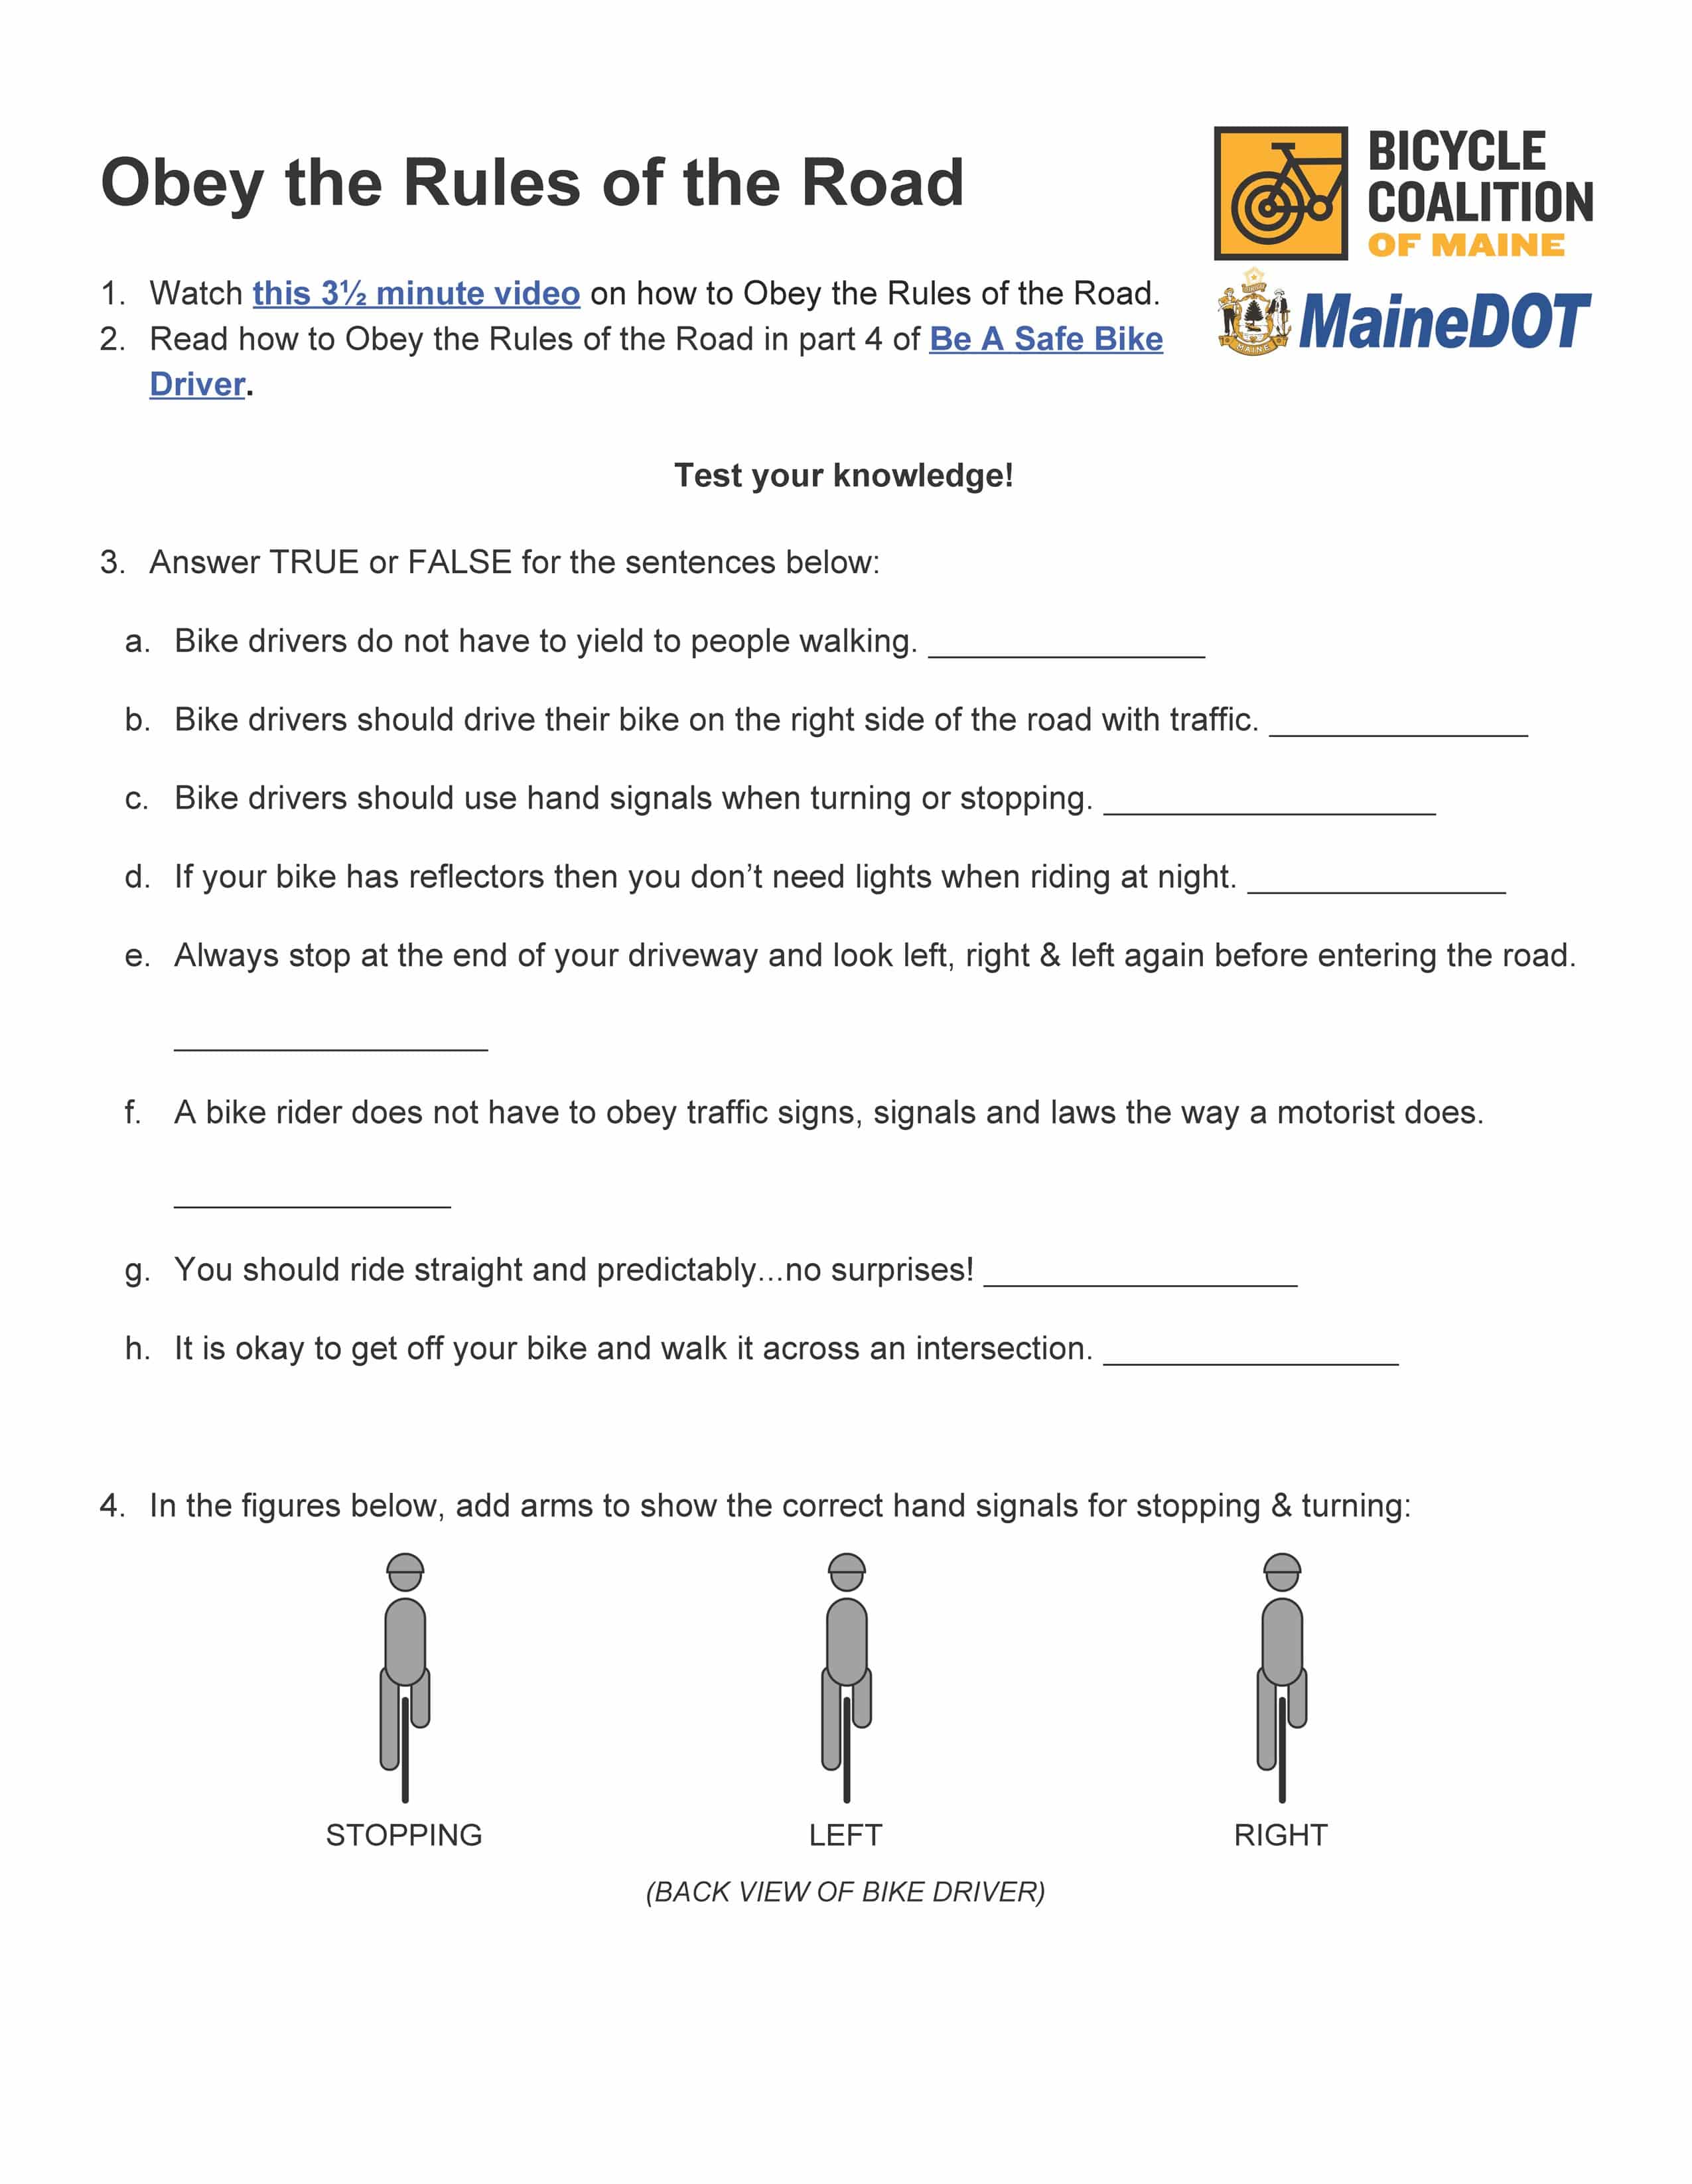 Rules of the road activity sheet